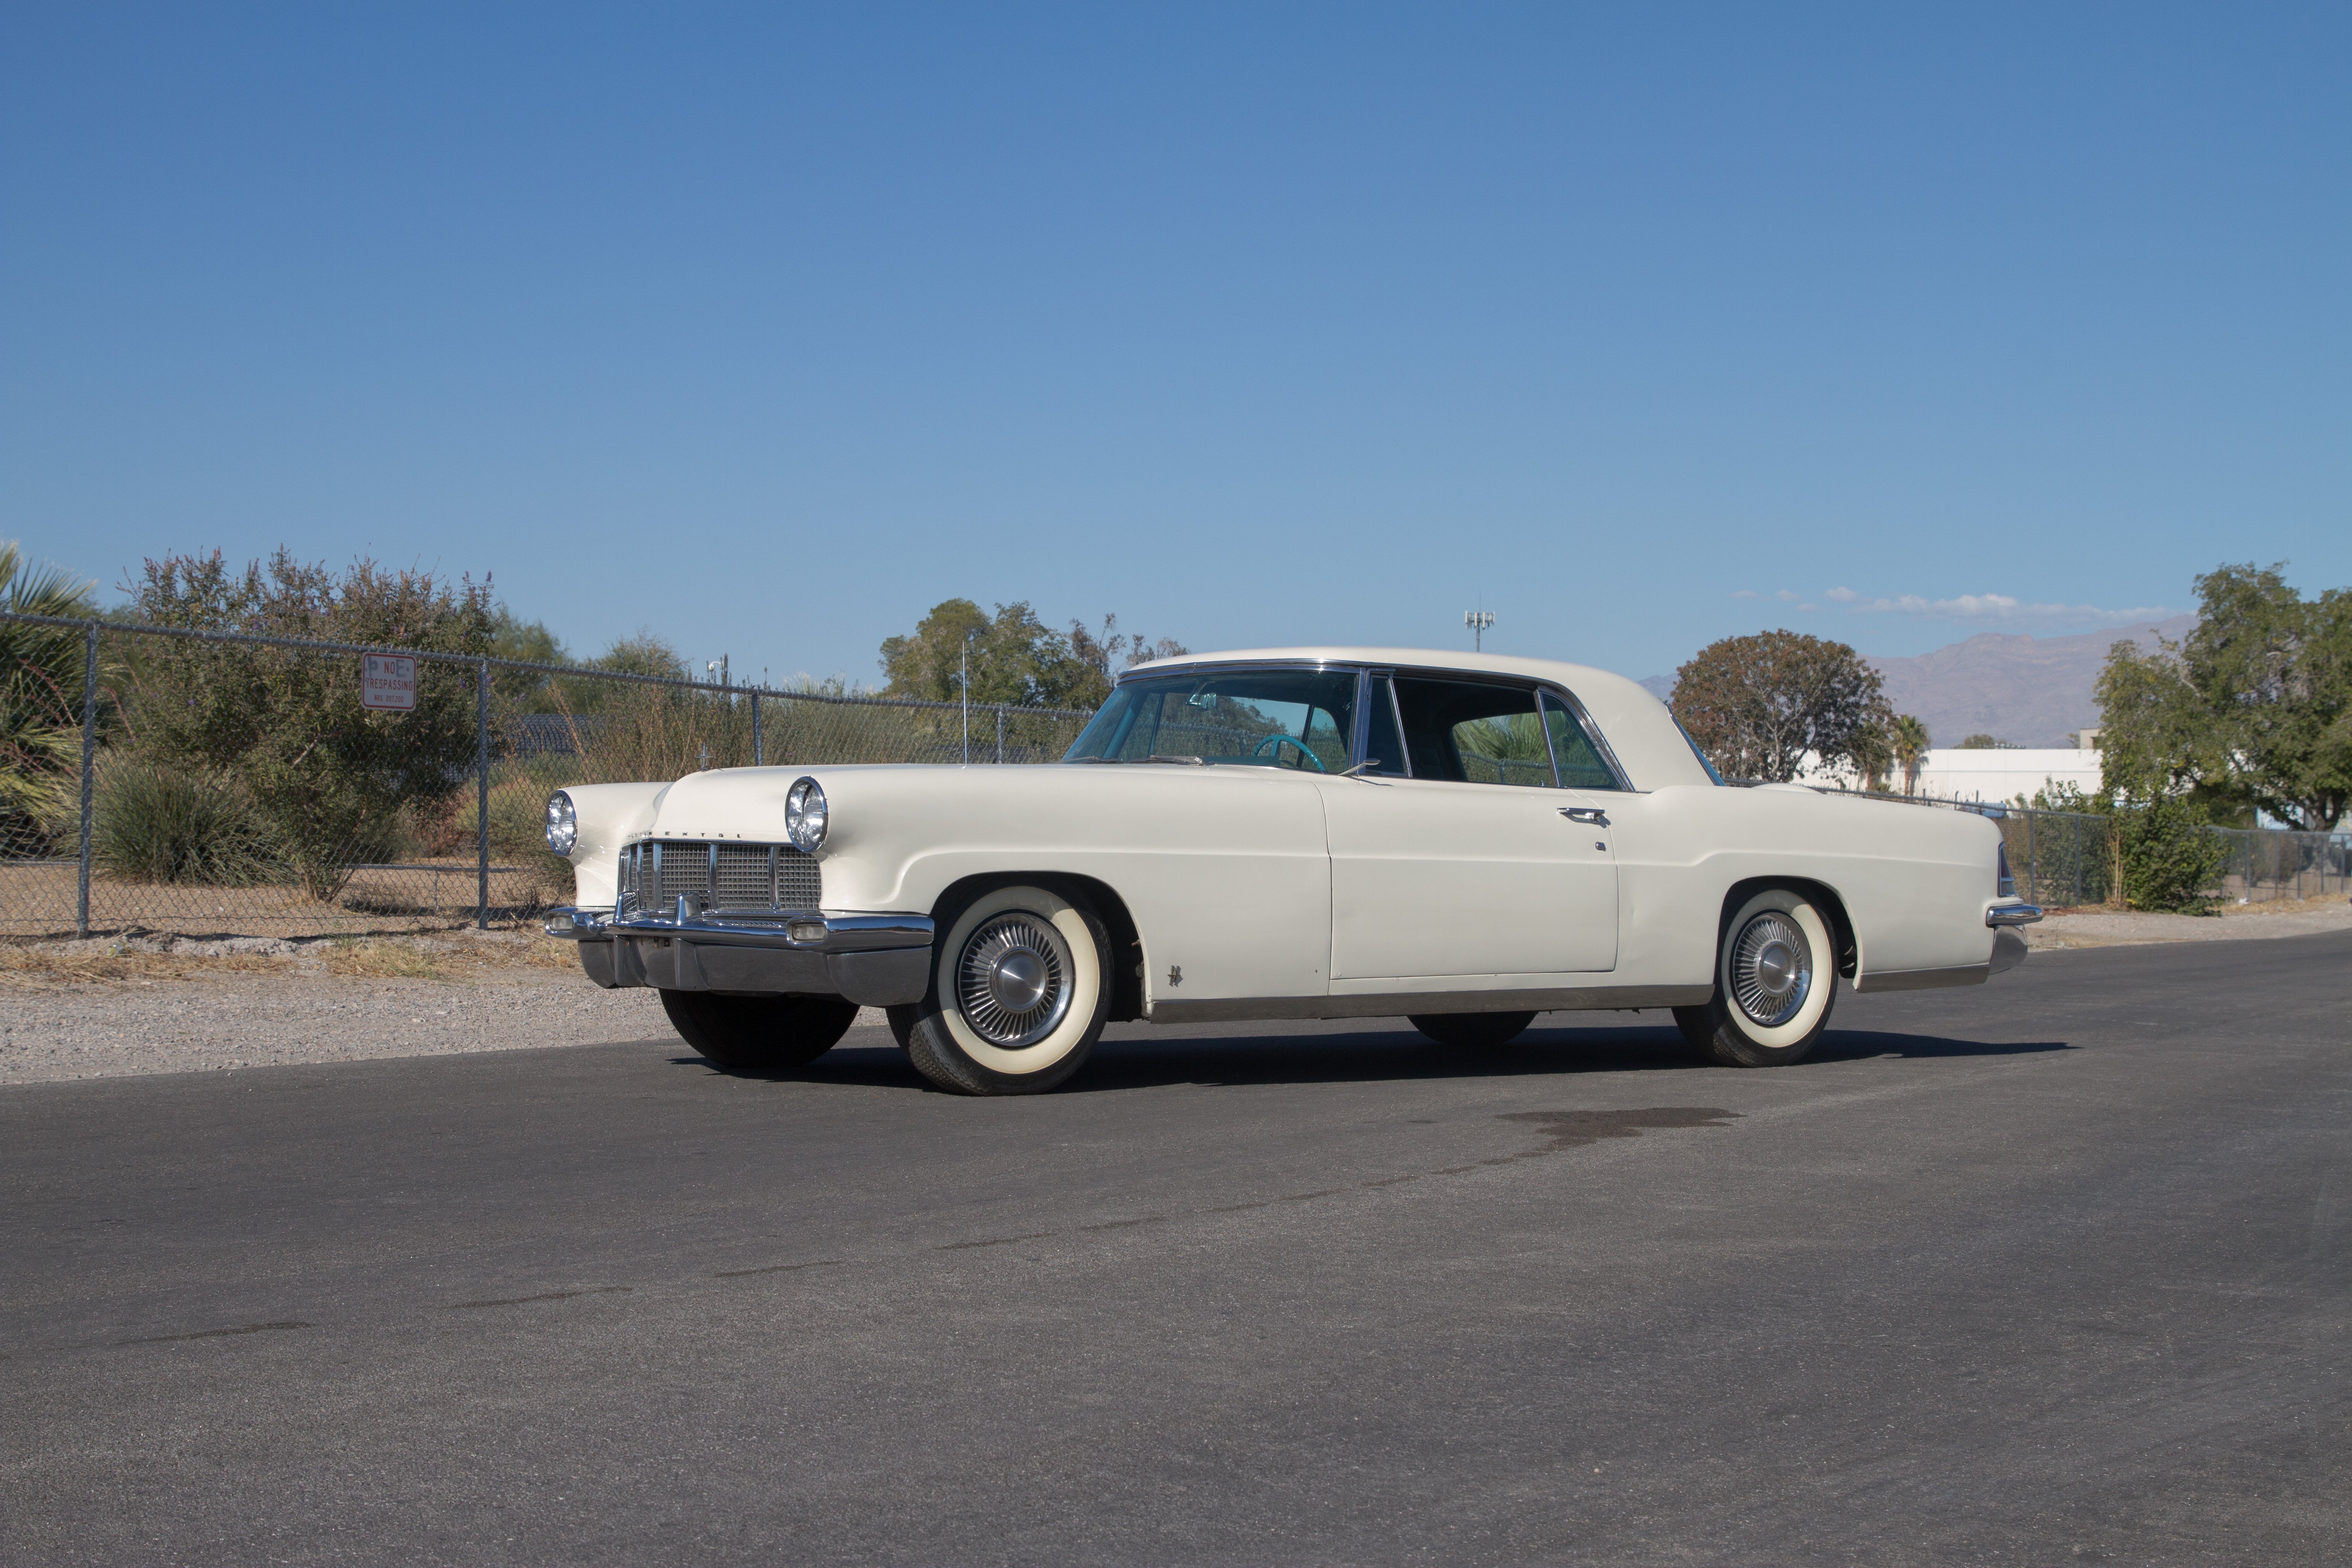 1957, Lincoln, Continental, Markii, Coupe, Classic, Usa, D, 5184x3456 01 Wallpaper